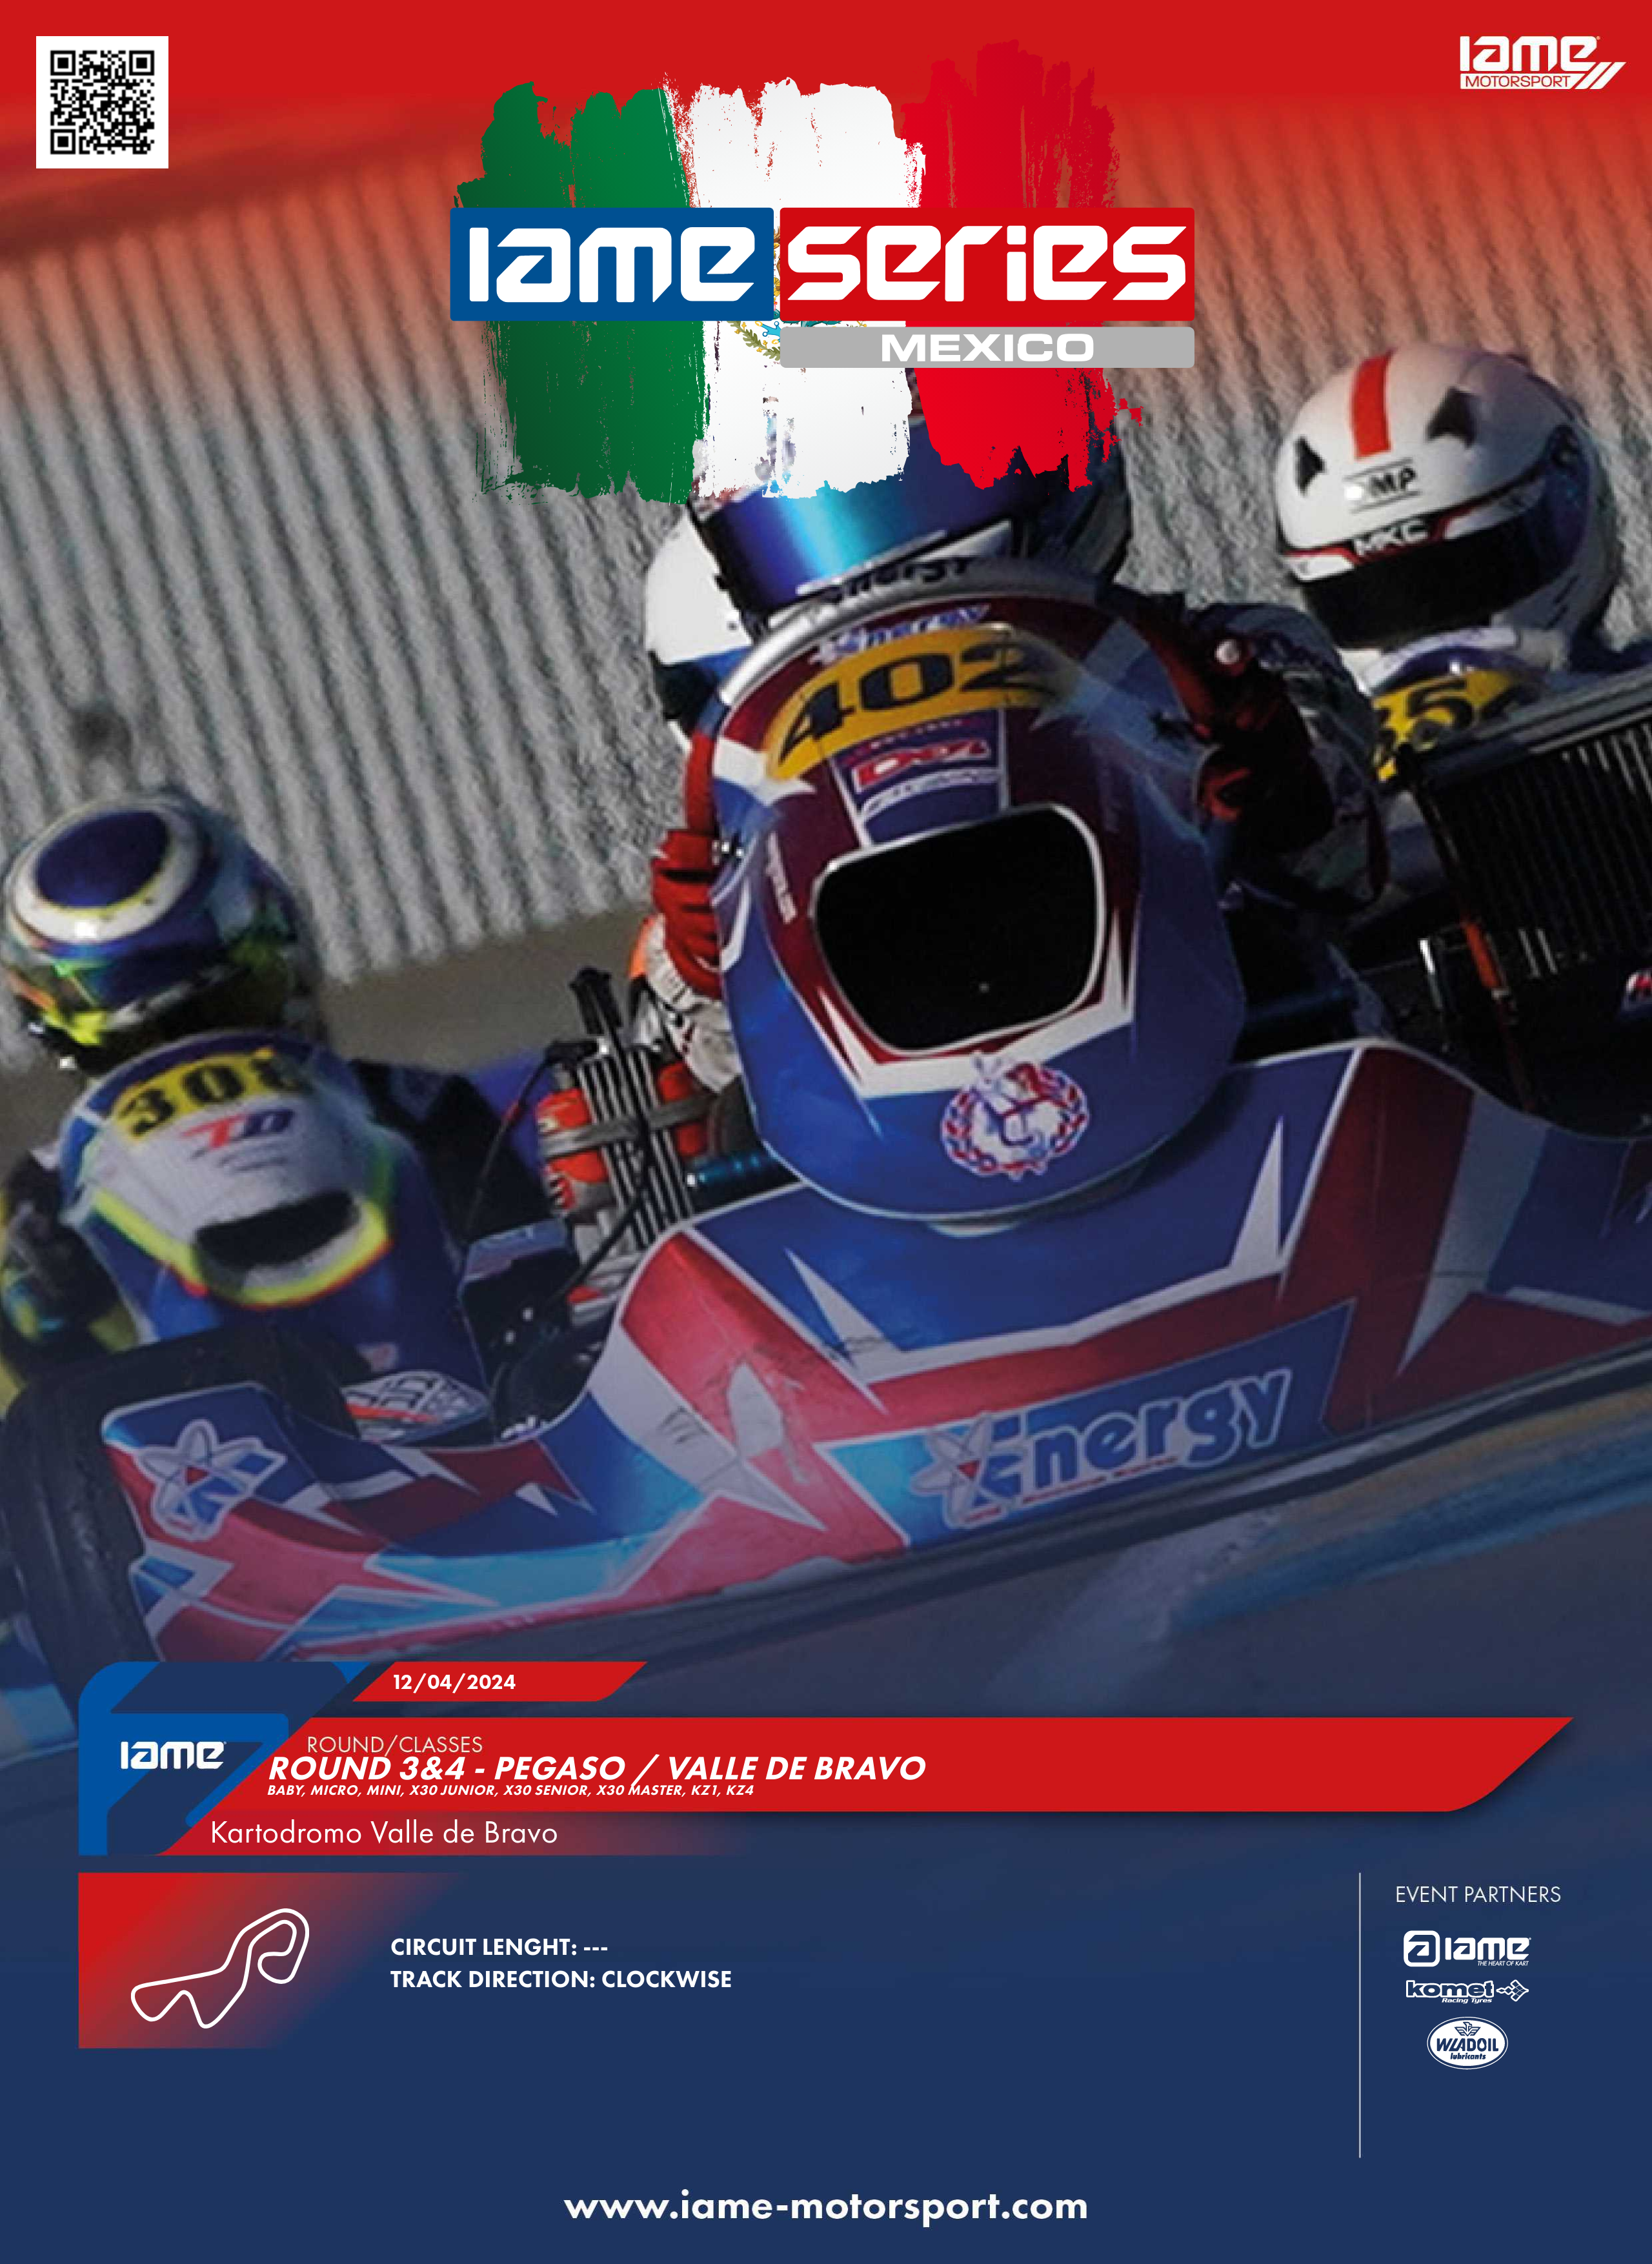 Revving Up for Round 3&4 - Pegaso / Valle De Bravo: A Gritty Karting Showdown in the Heart of Mexico